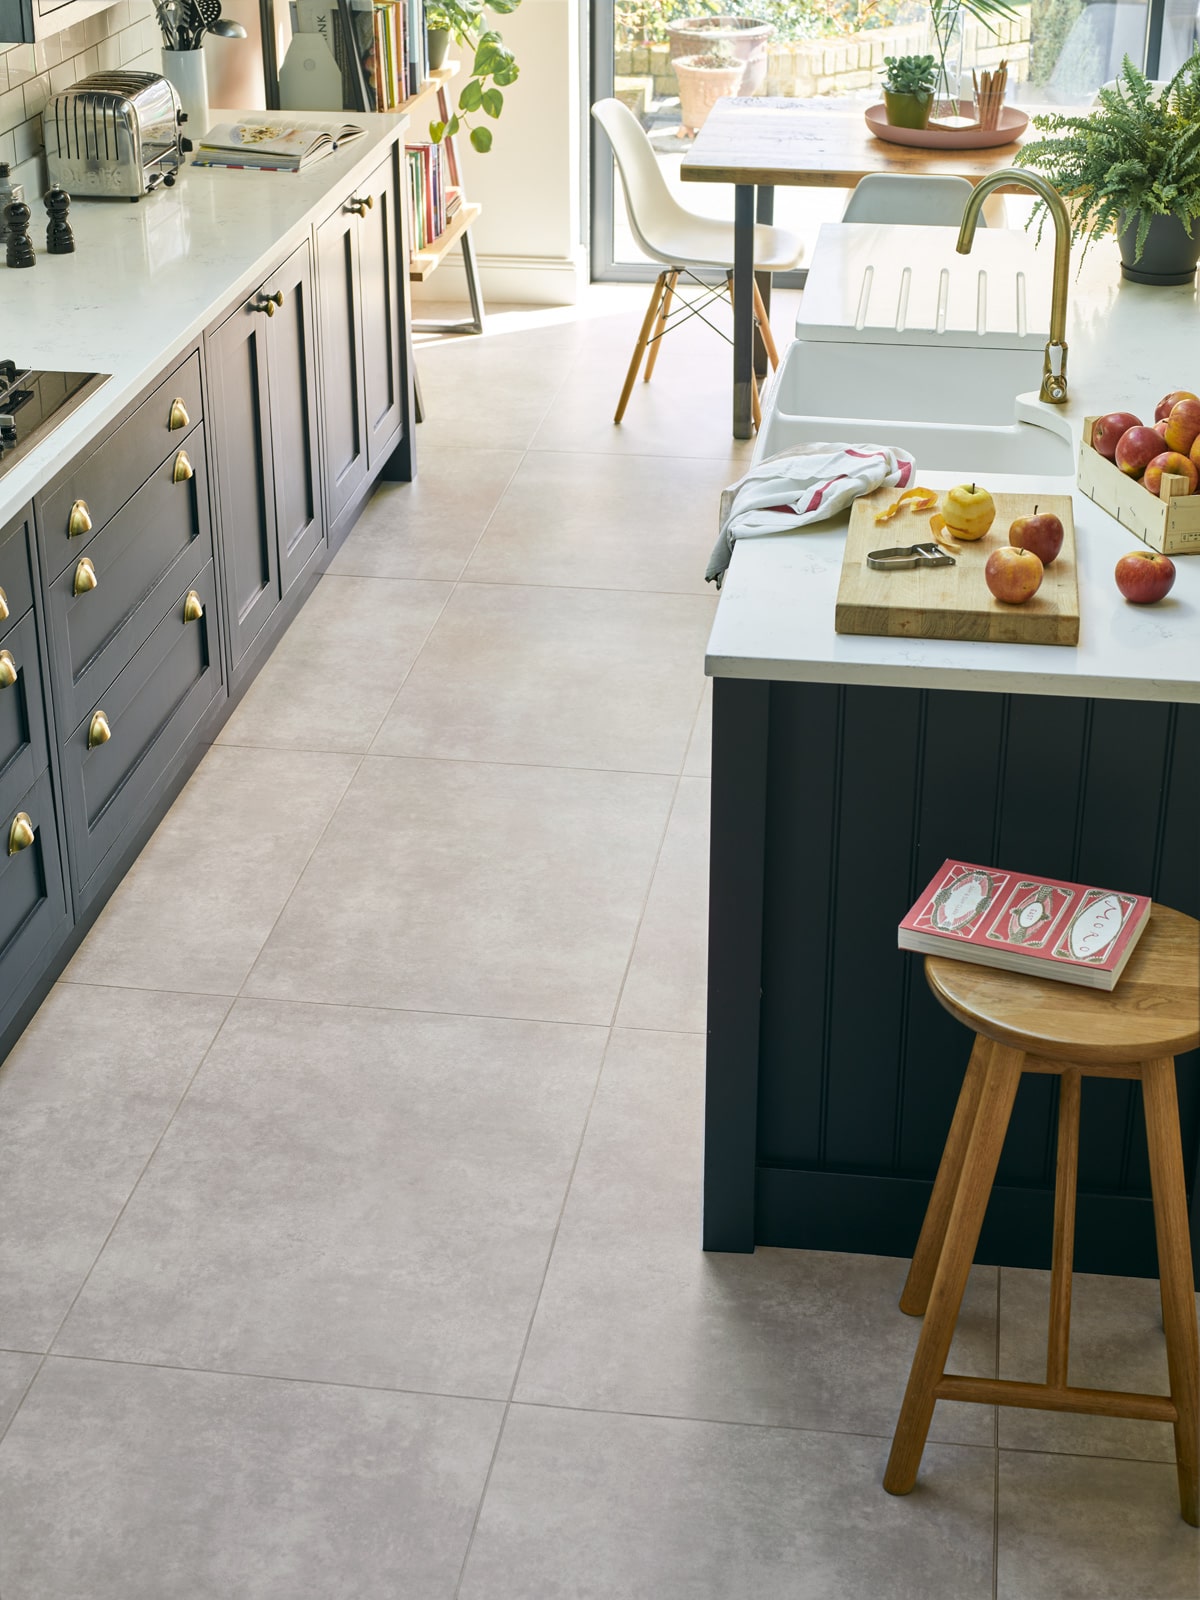 Villa Concrete in the Amtico Spacia collection, one of the new stone effect LVTs, available from Flooring 4 You Ltd in Cheshire